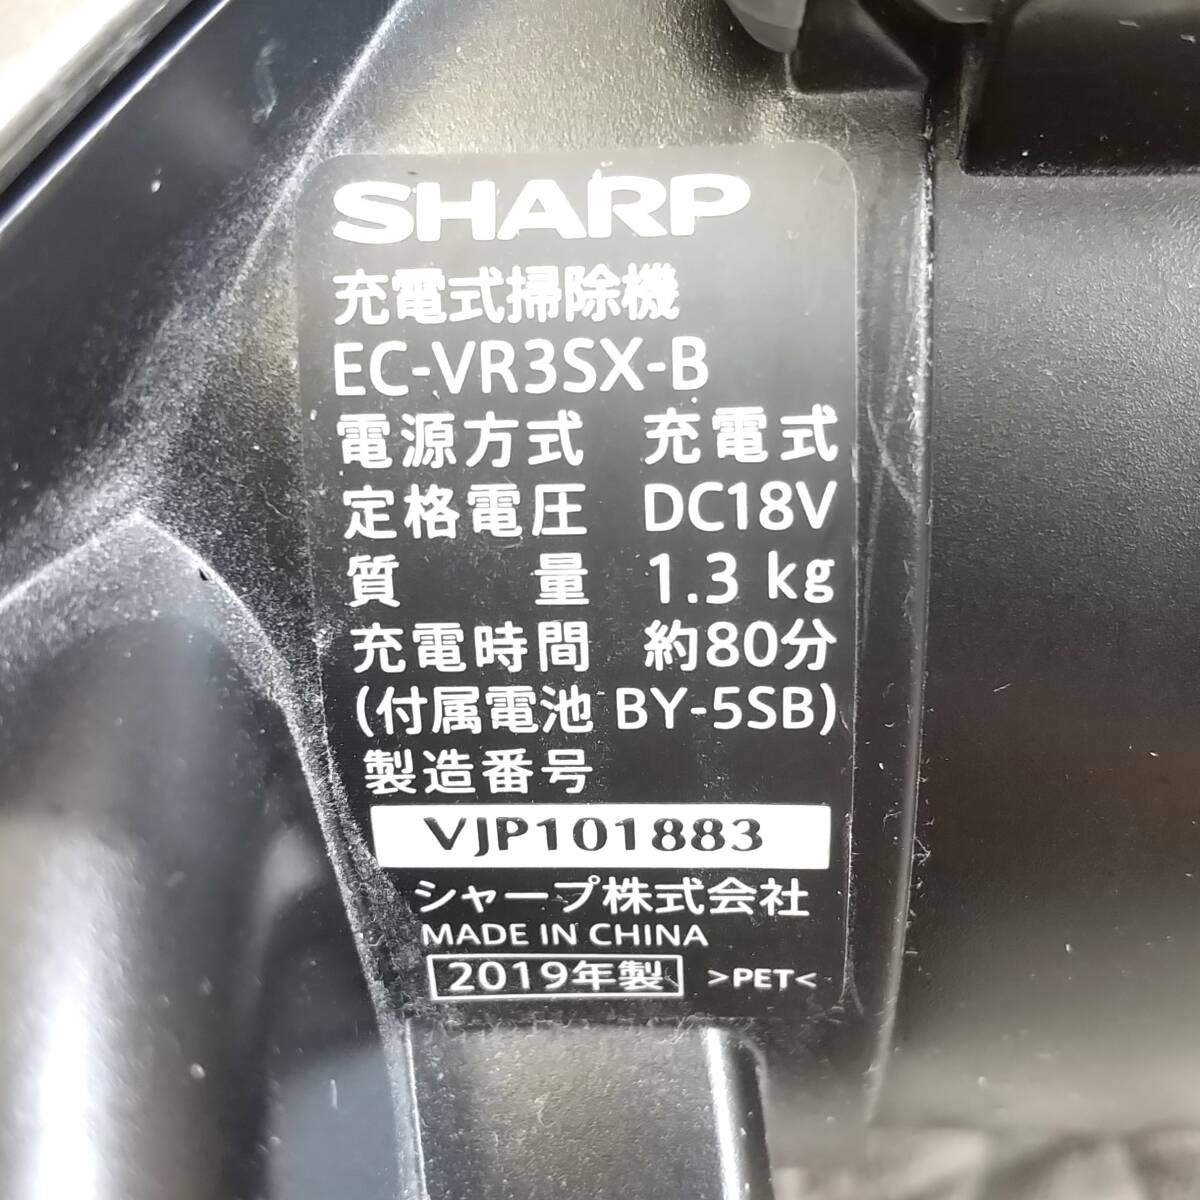 [411] secondhand goods sharp cordless cleaner EC-VR35X-B 2019 year made 